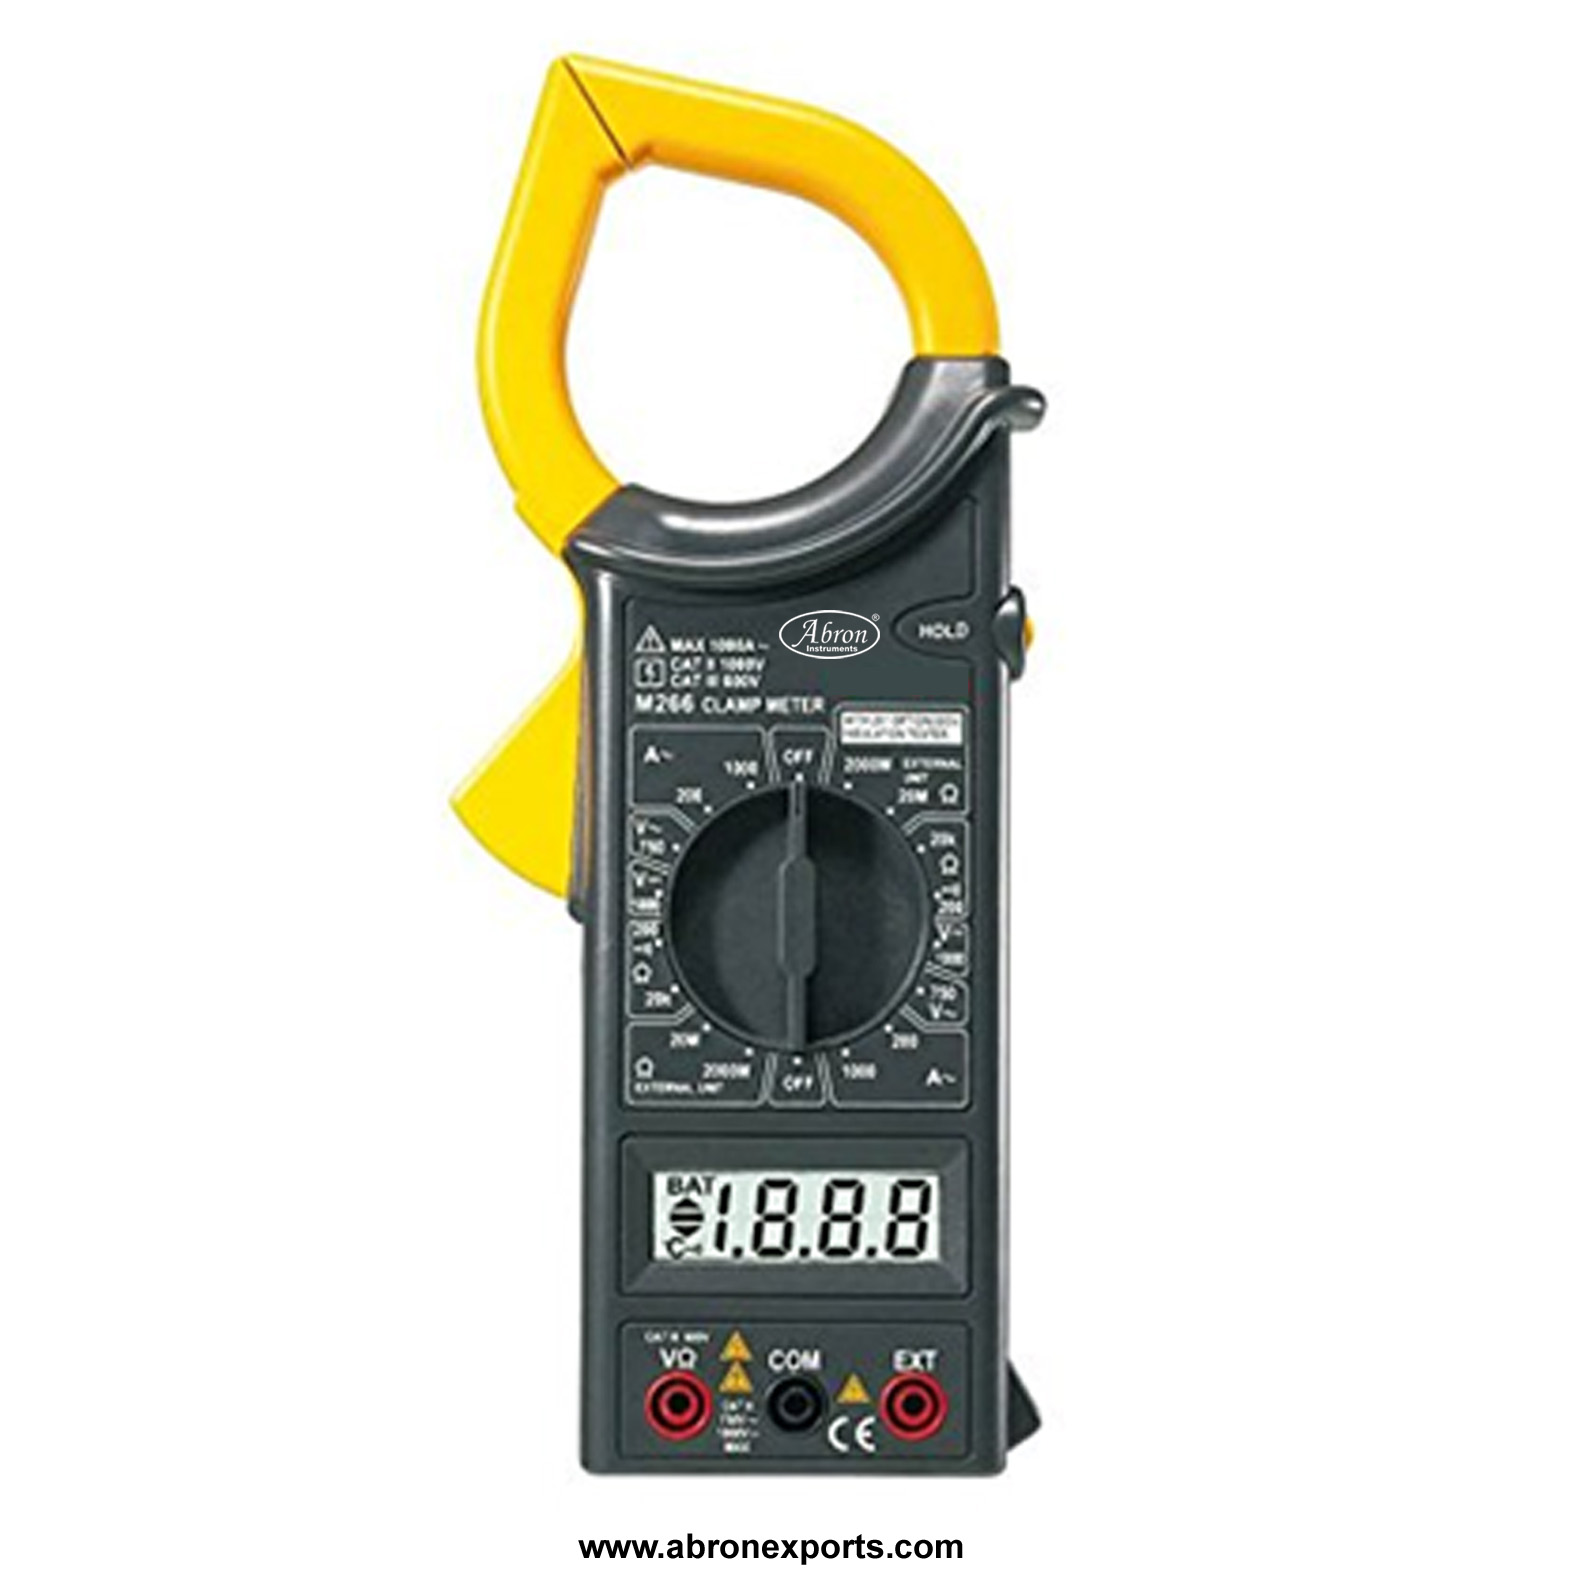 Clamp meter multimeter digital ac dc voltage ac current resistance data hold abron AE-1218-M266 